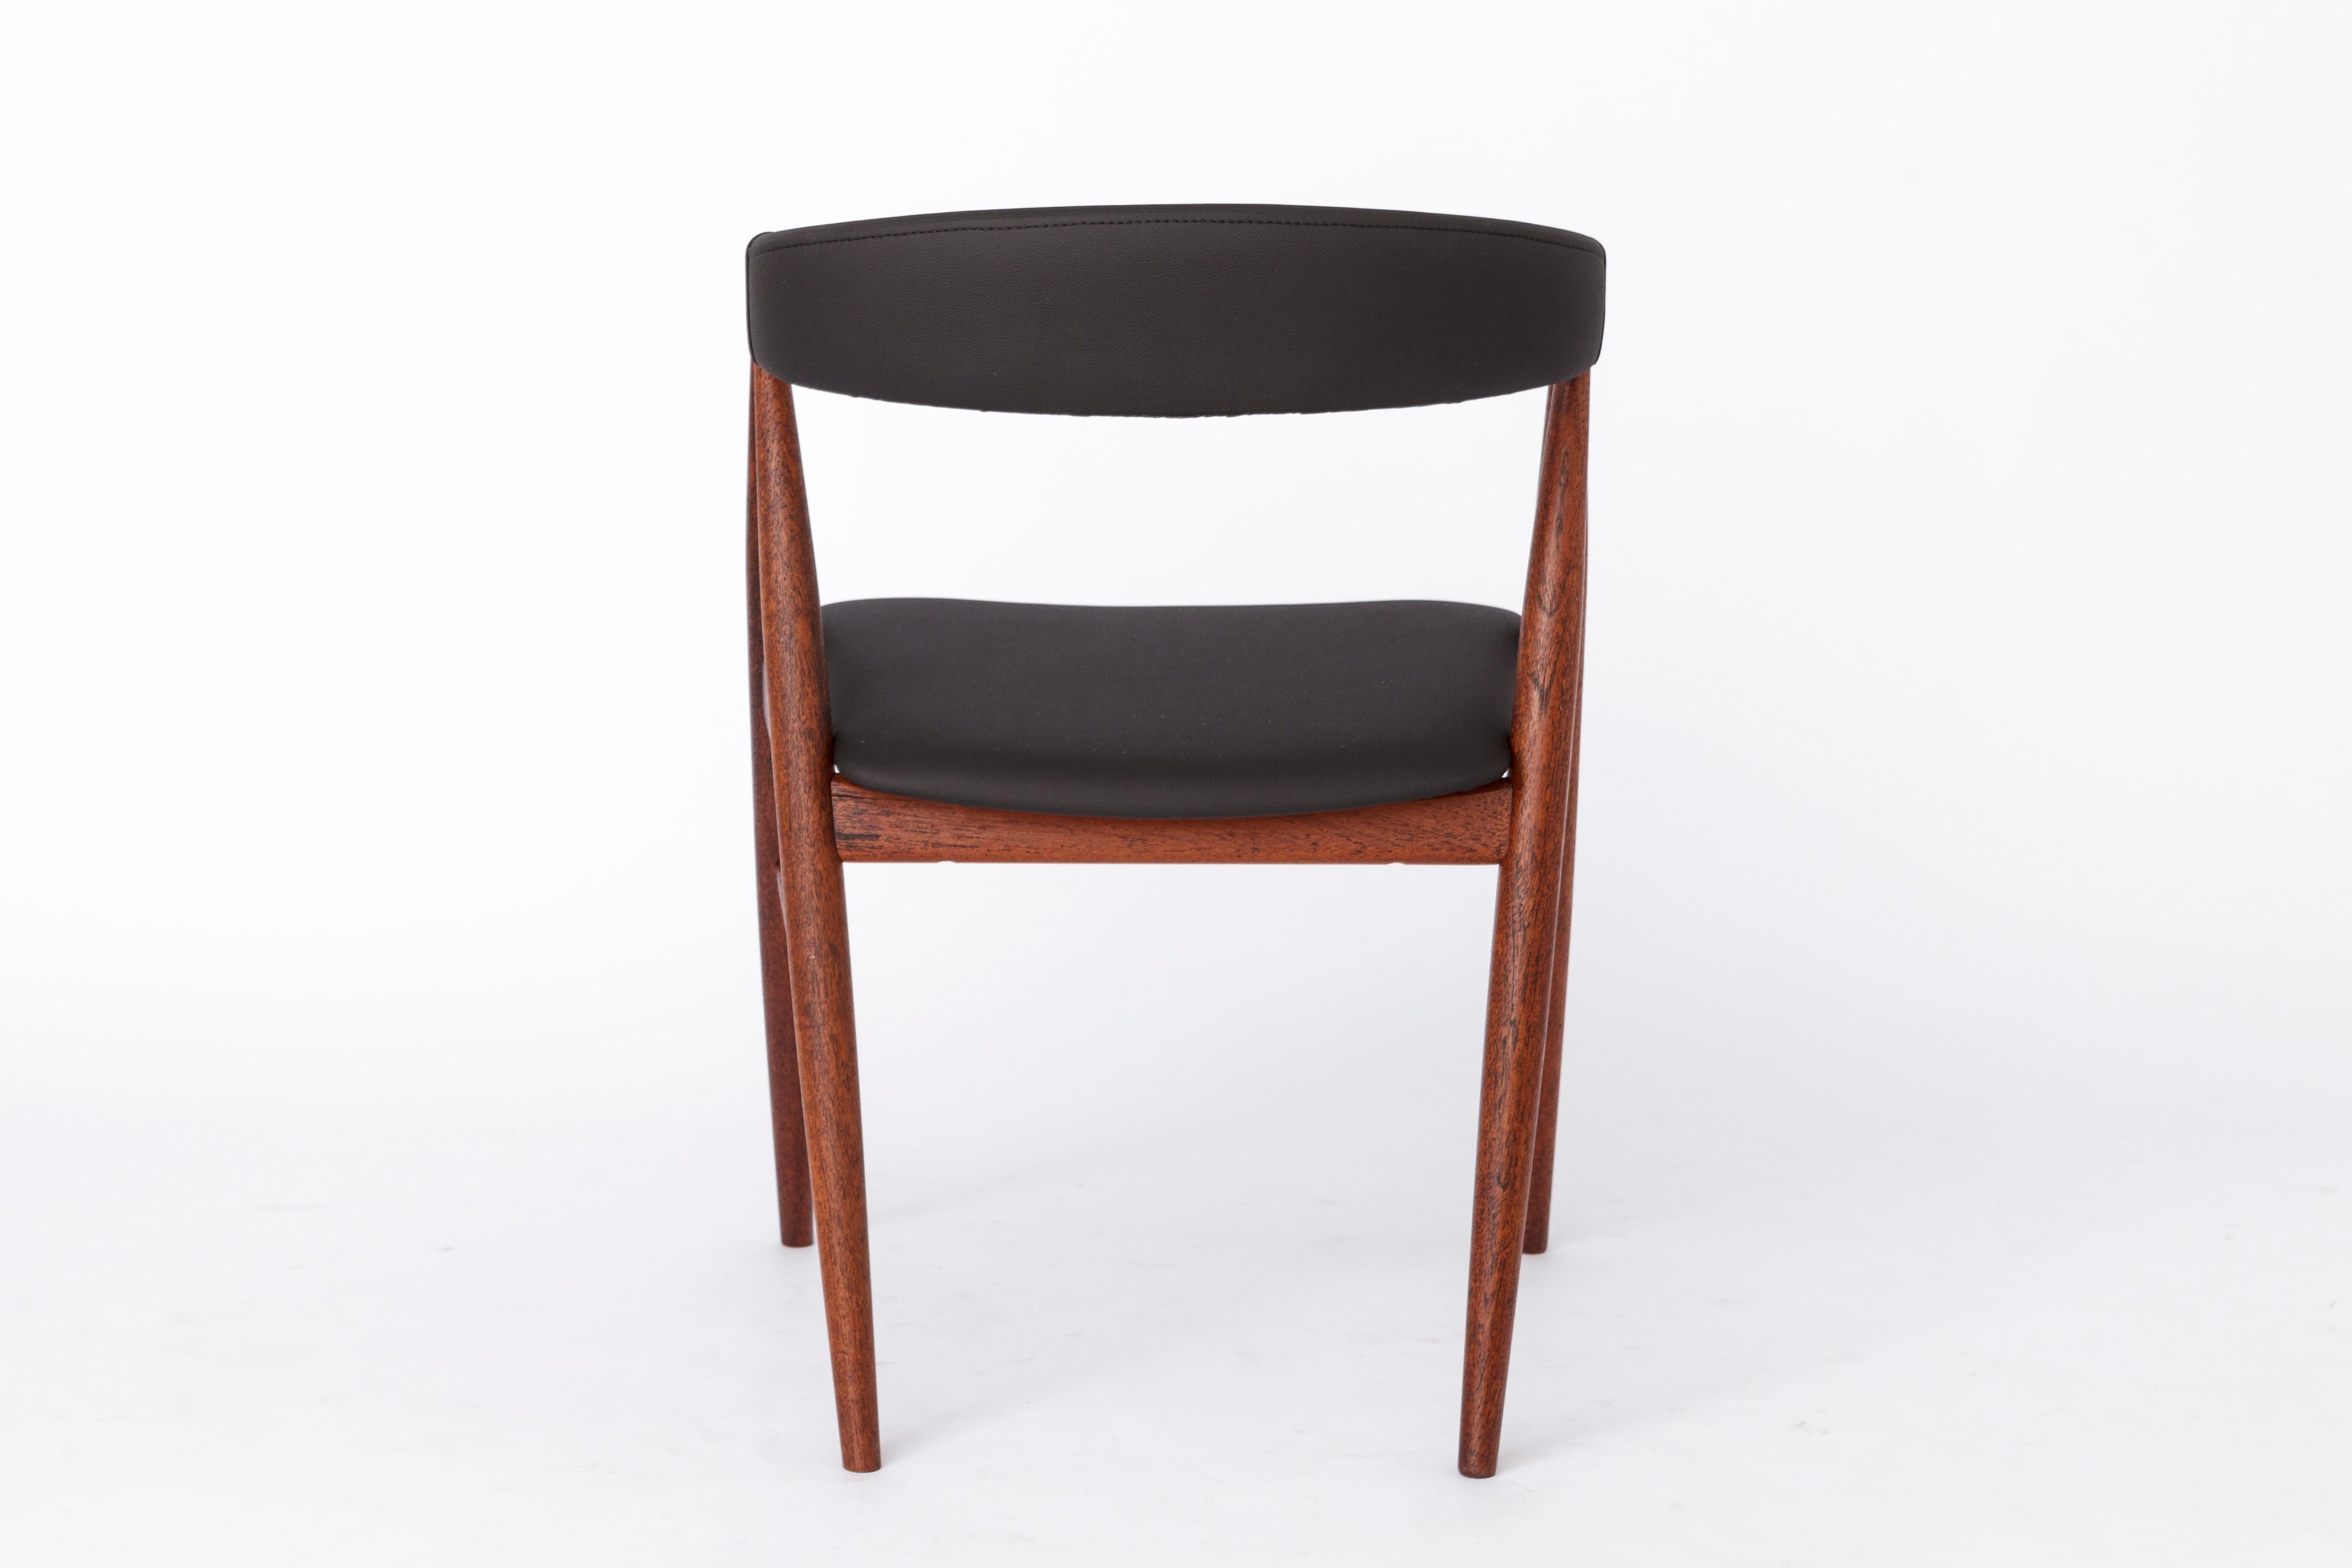 Mid-20th Century 1 of 2 Vintage Chairs 1960s by Ejnar Larsen & Aksel Bender, Denmark